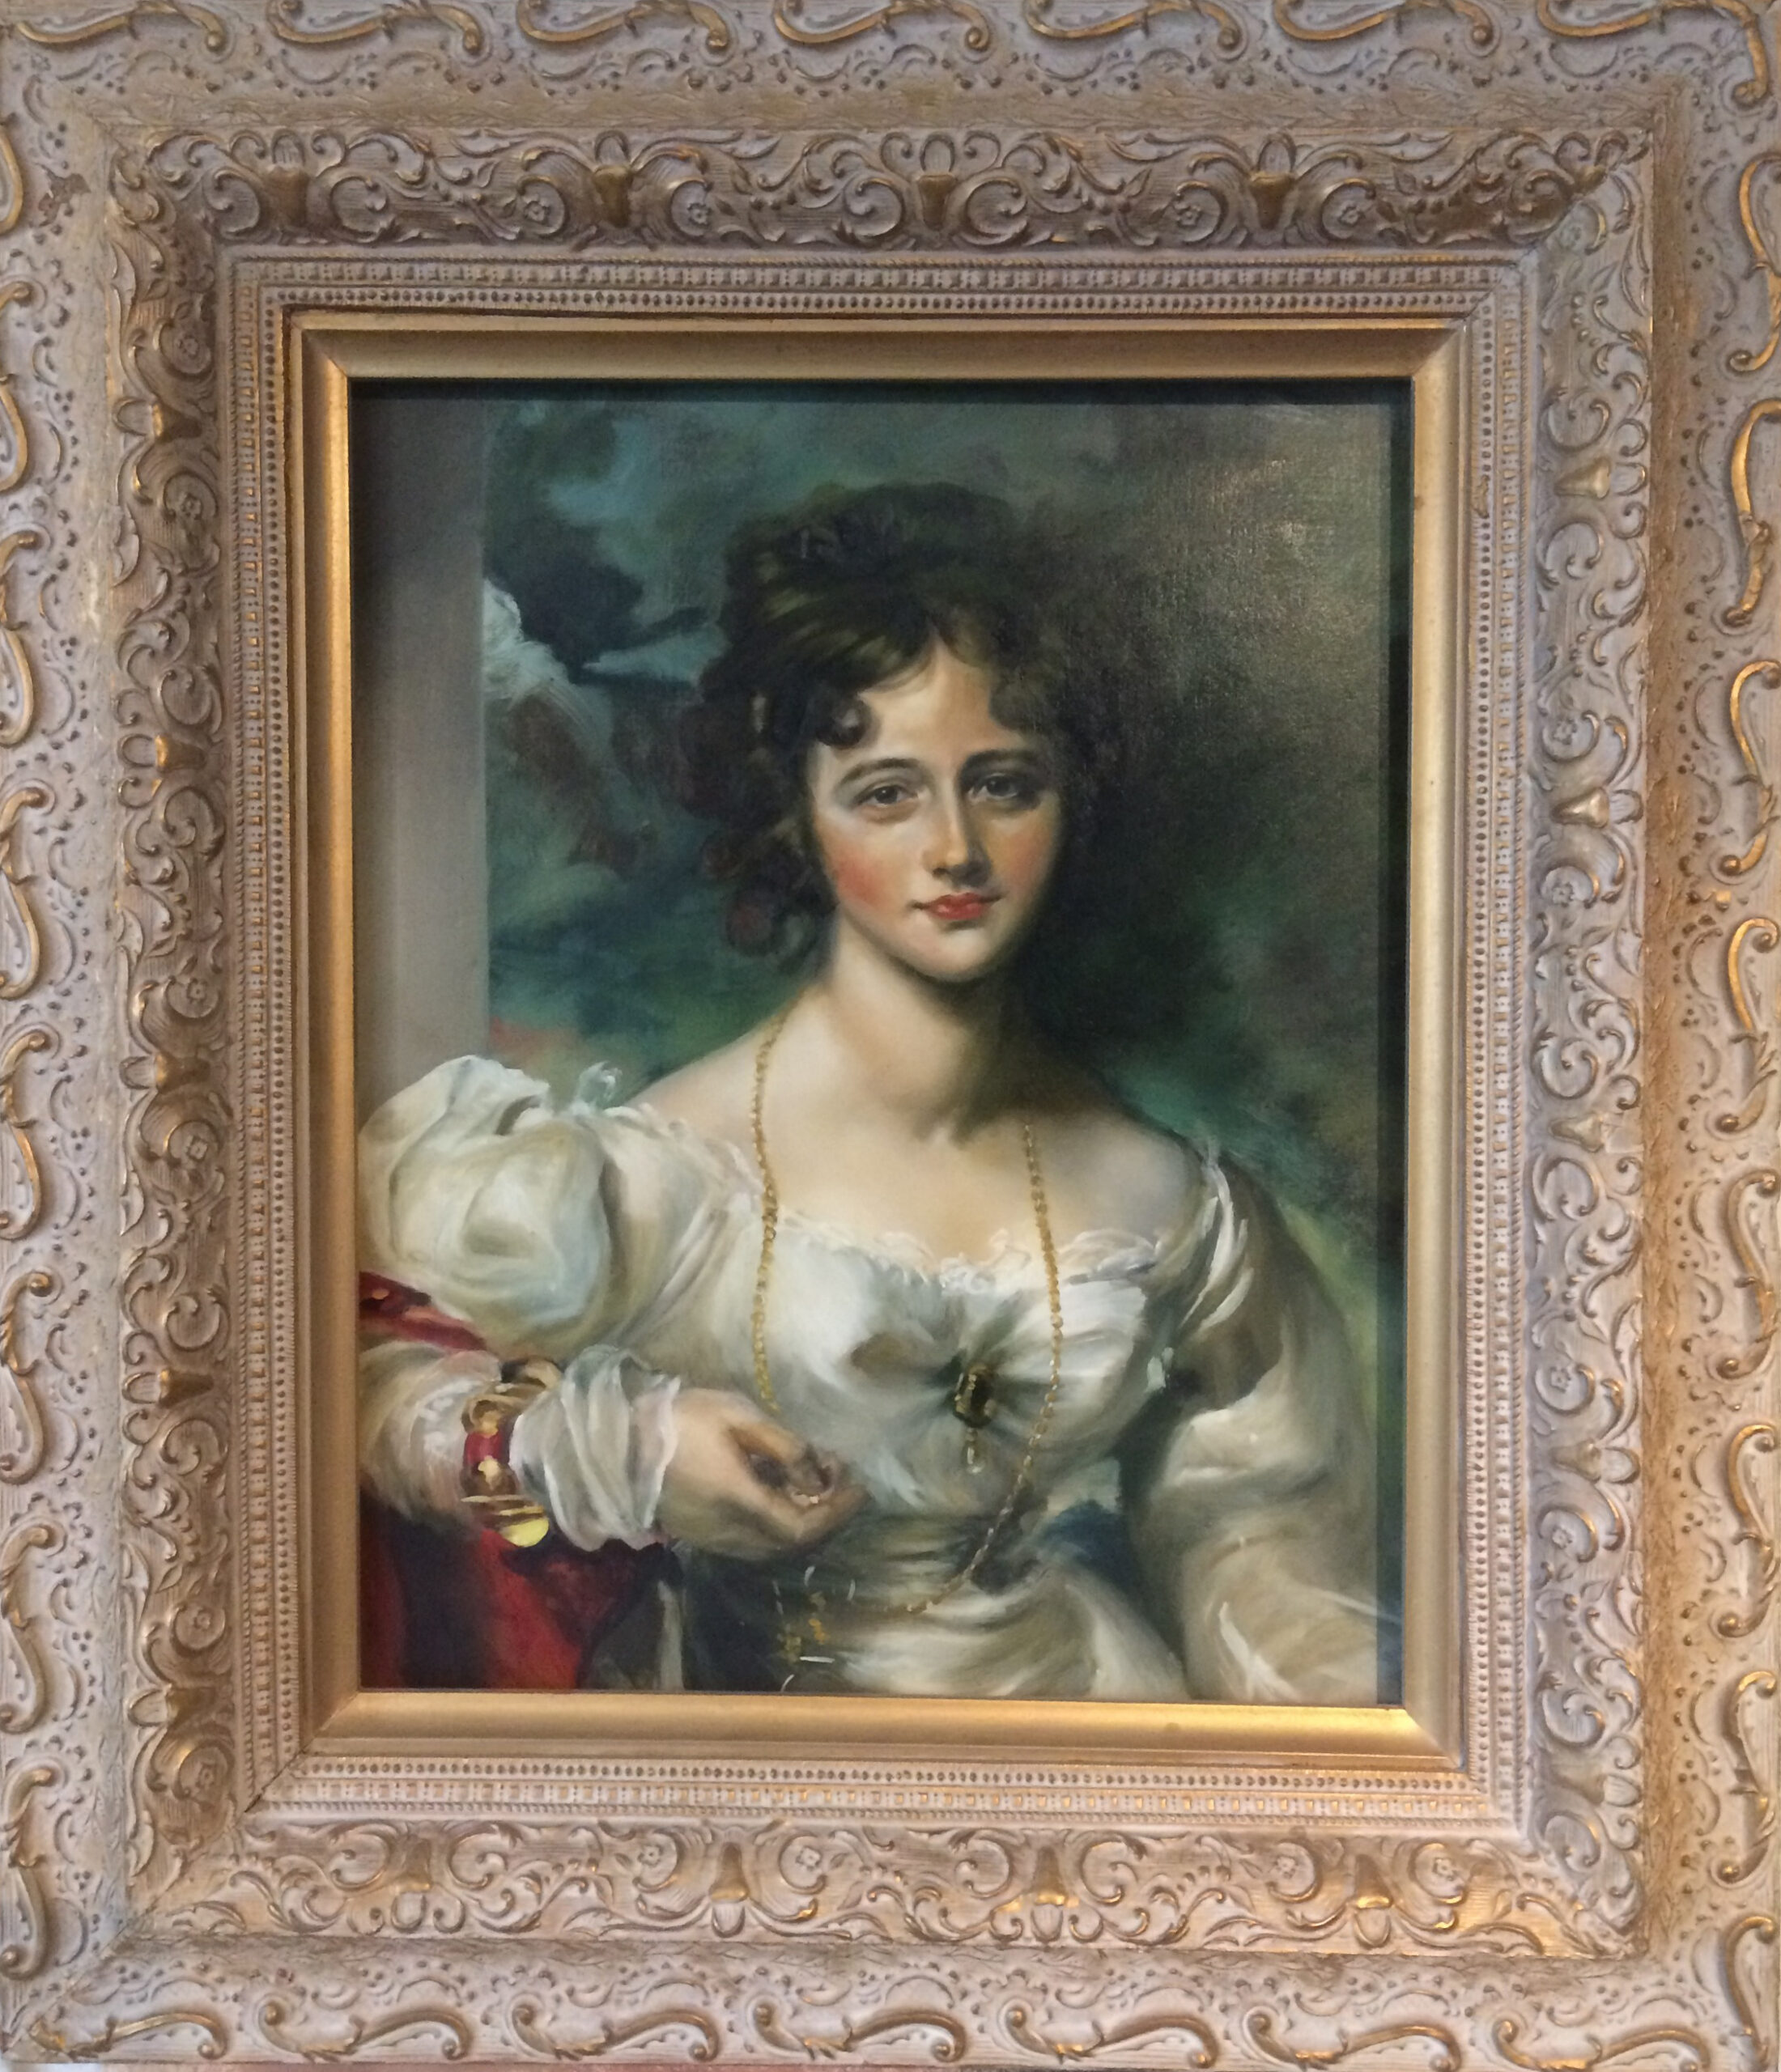 oil painting copy of artist ts lawrence, portrait of a young lady, 18th century style, lady in white dress posing.